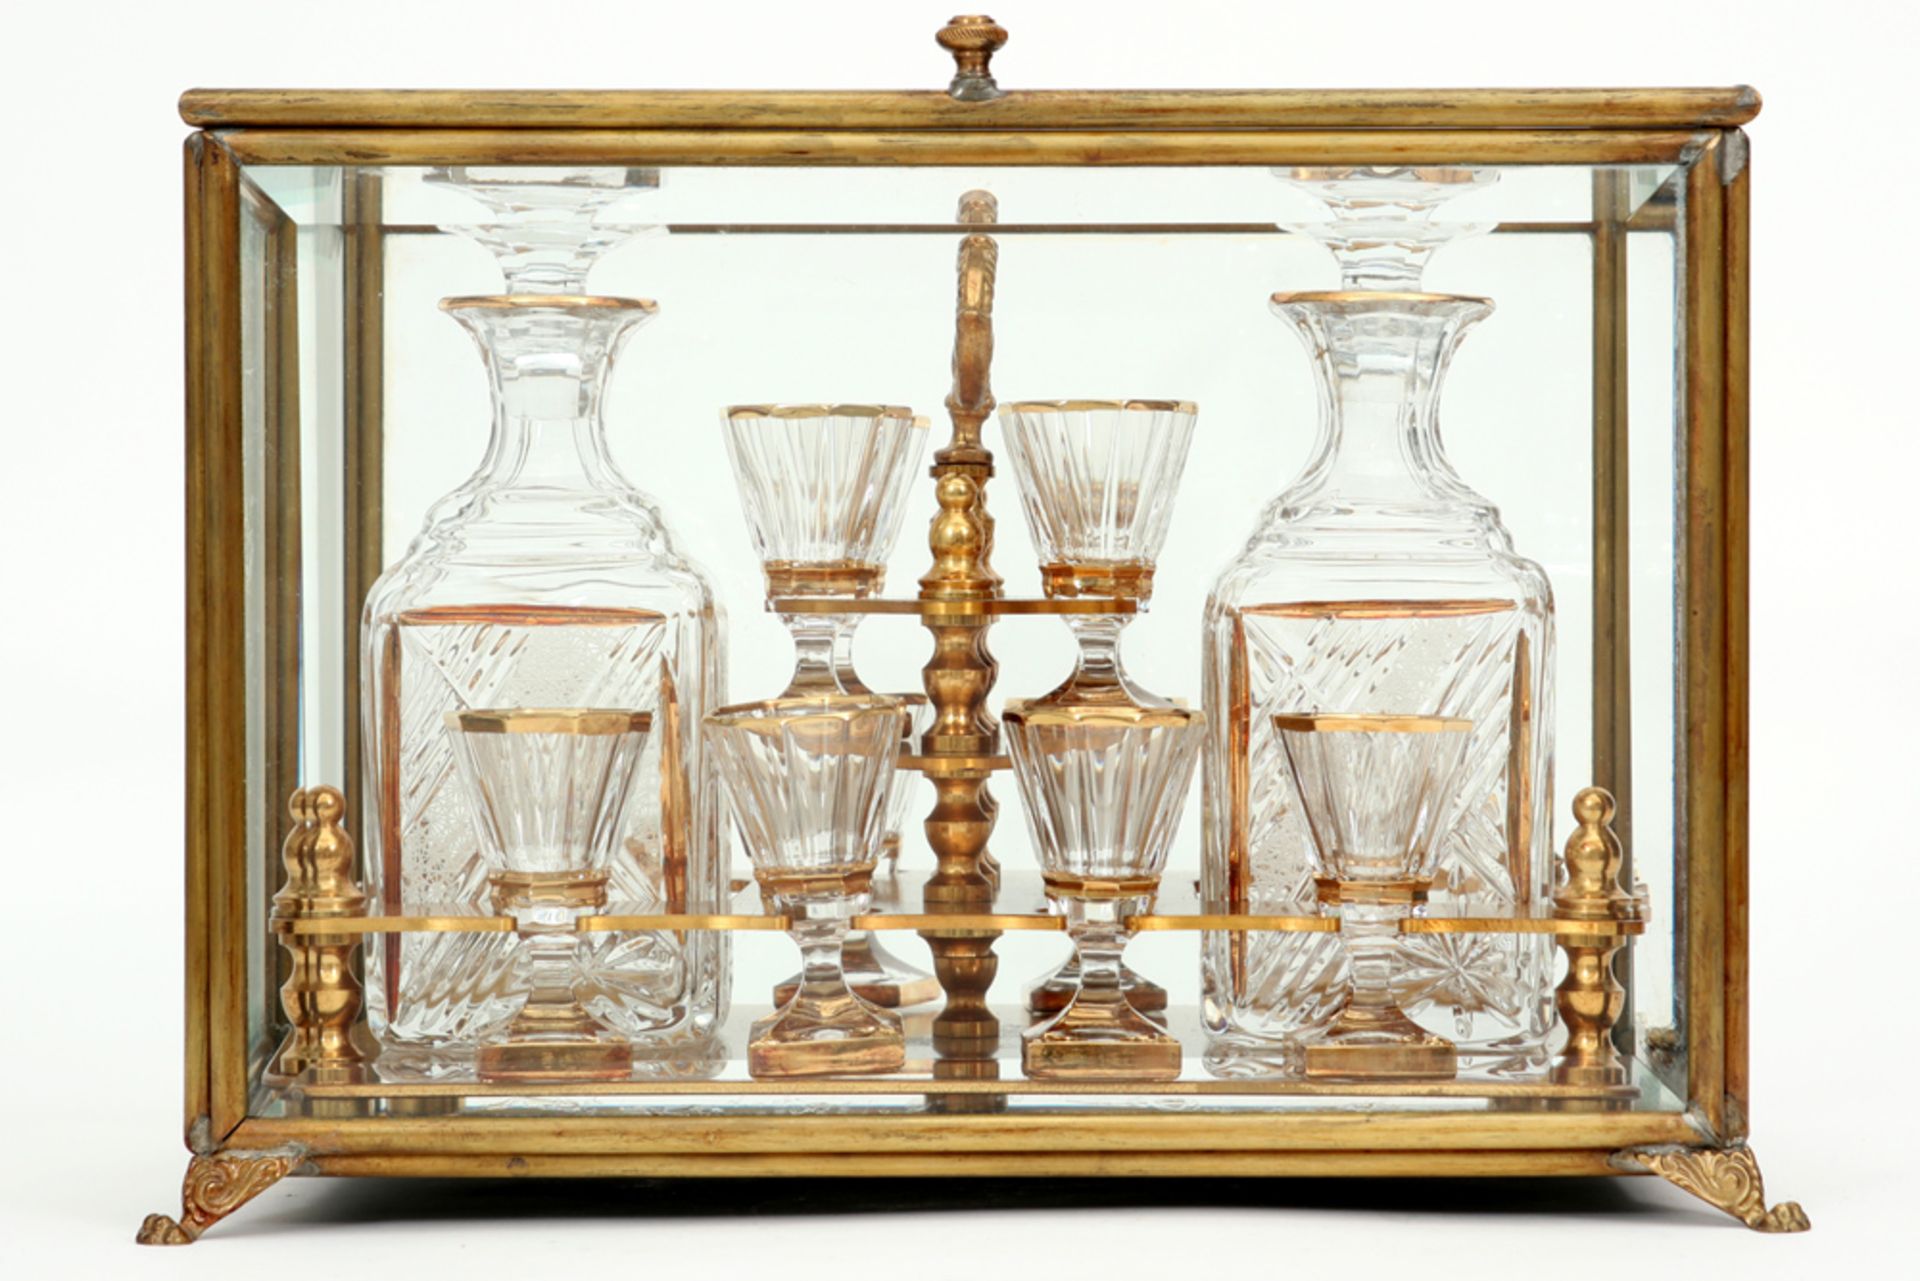 19th Cent. licquor cabinet with case in glass and brass and with its original content of glasses and